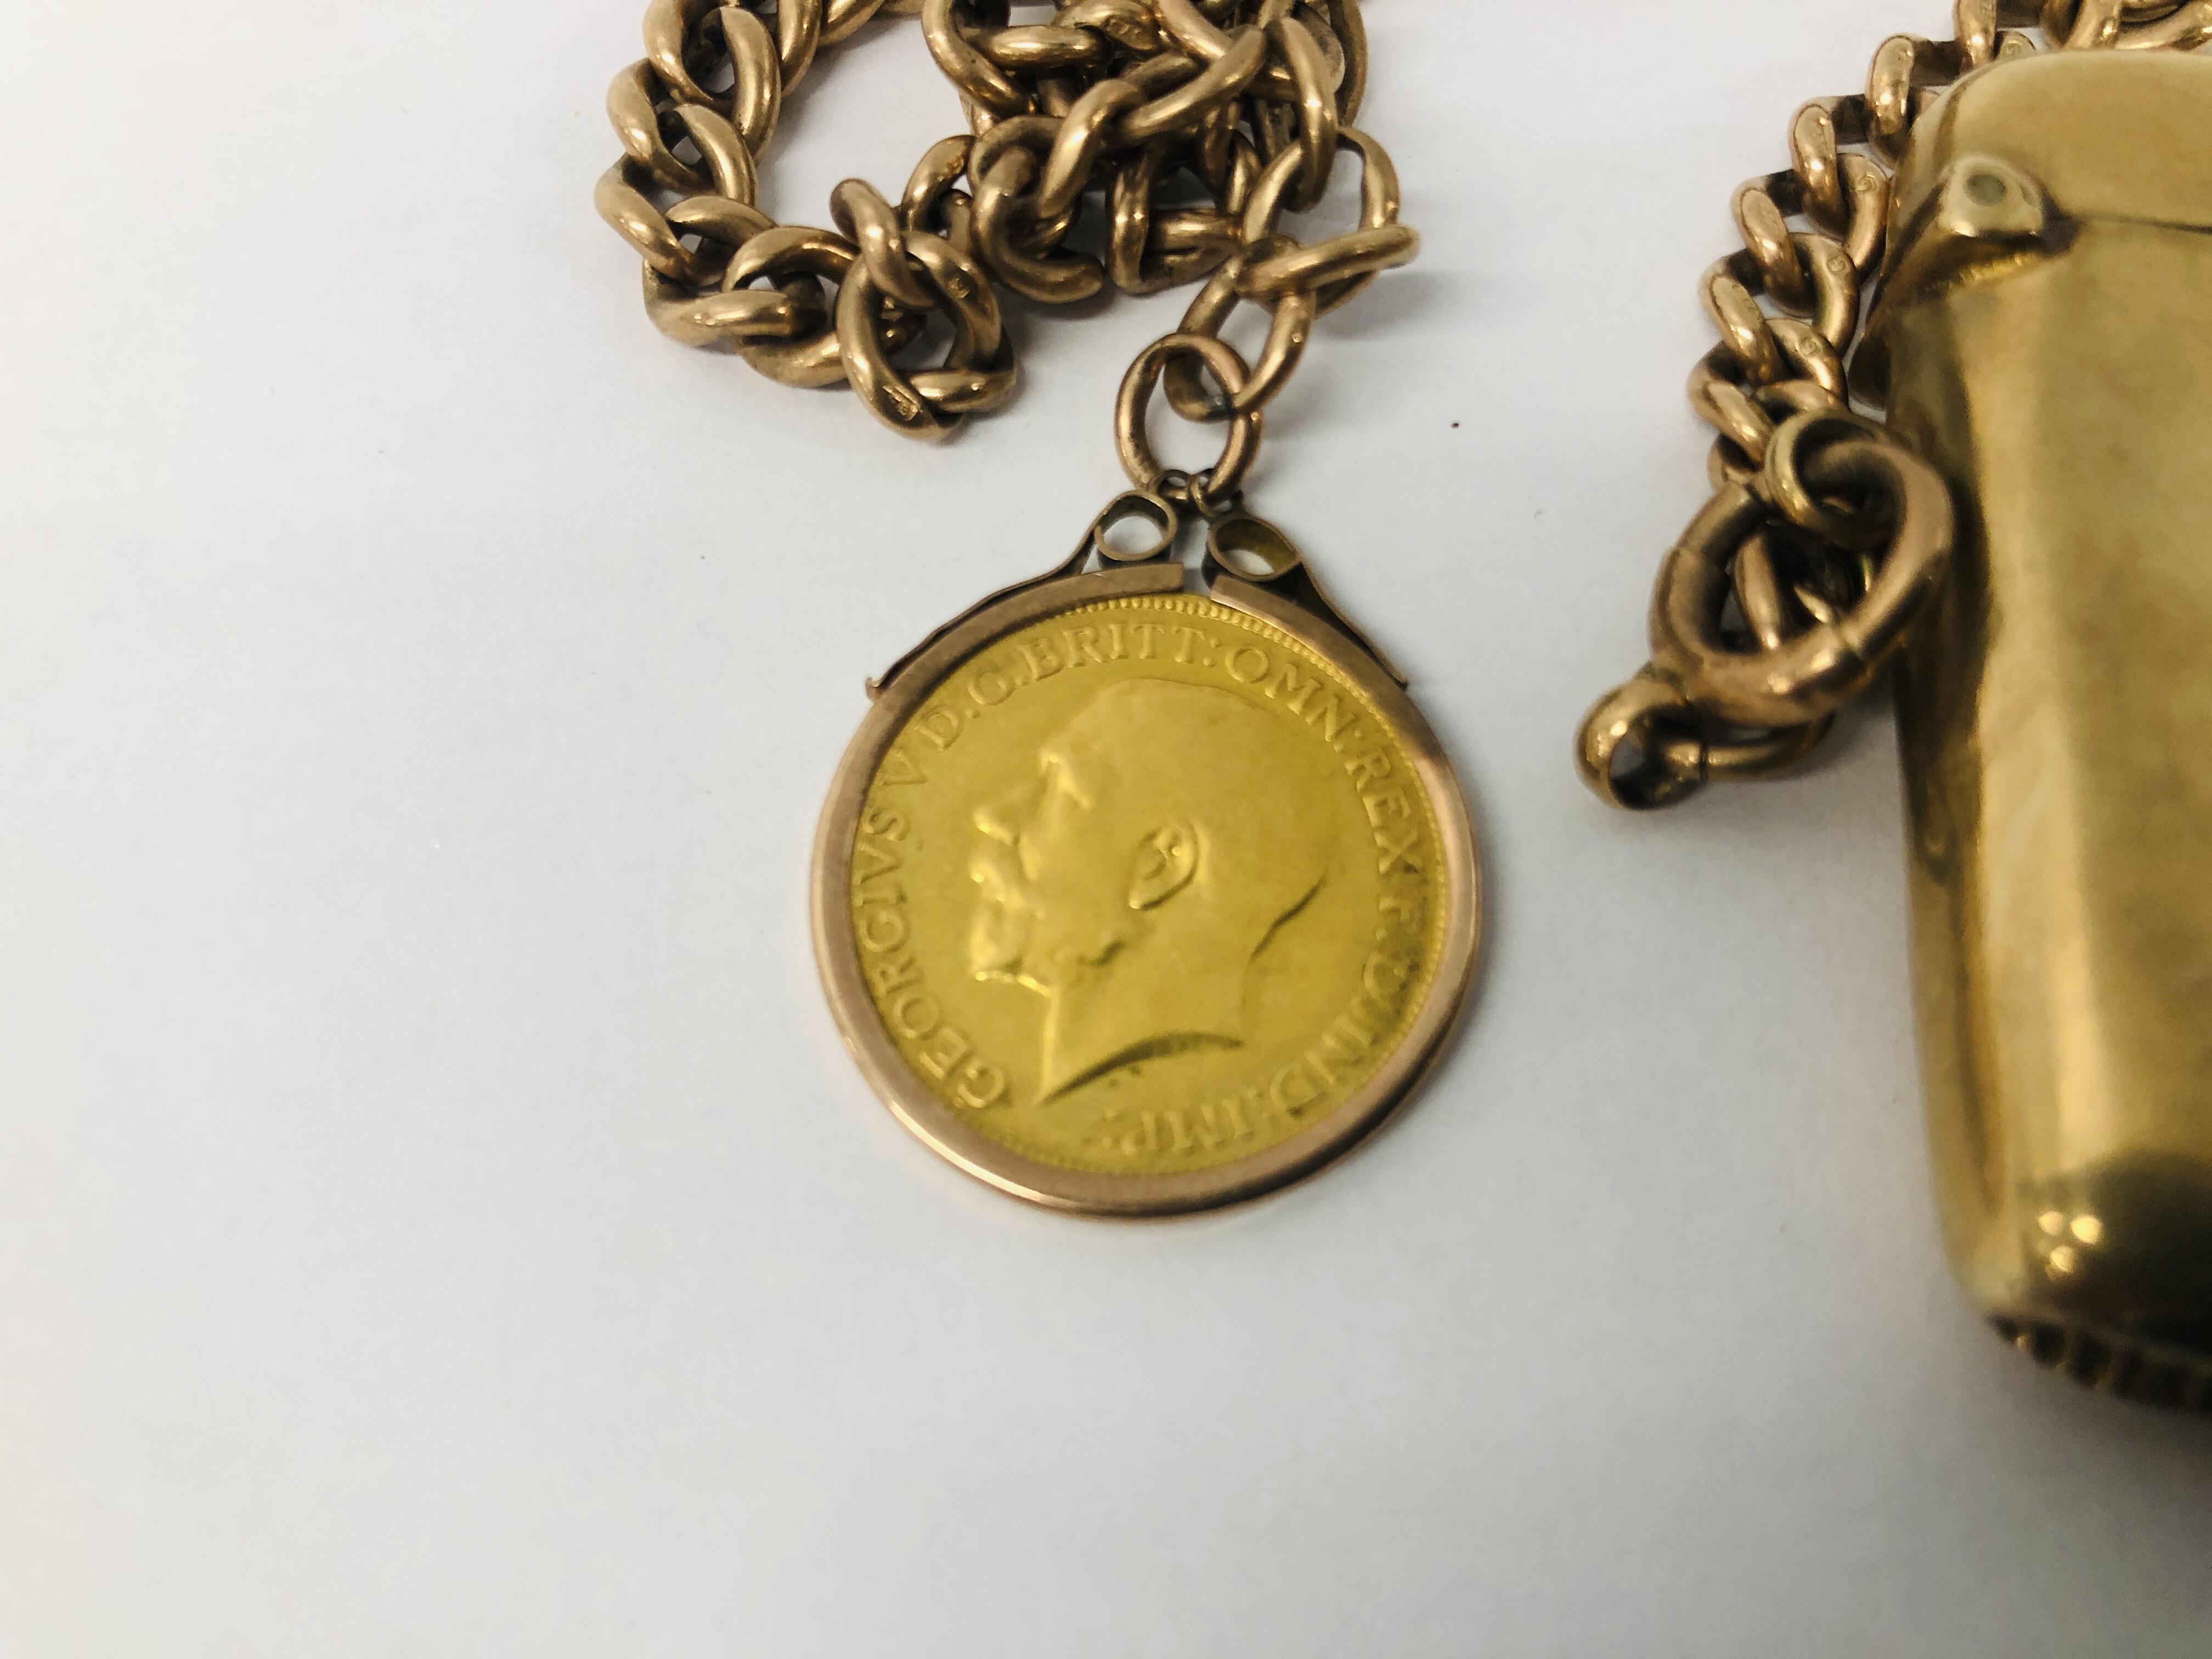 A WALTHAM GOLD PLATED POCKET WATCH ON 9CT GOLD WATCH CHAIN WITH A GEORGE V 1913 FULL SOVEREIGN COIN - Image 5 of 19